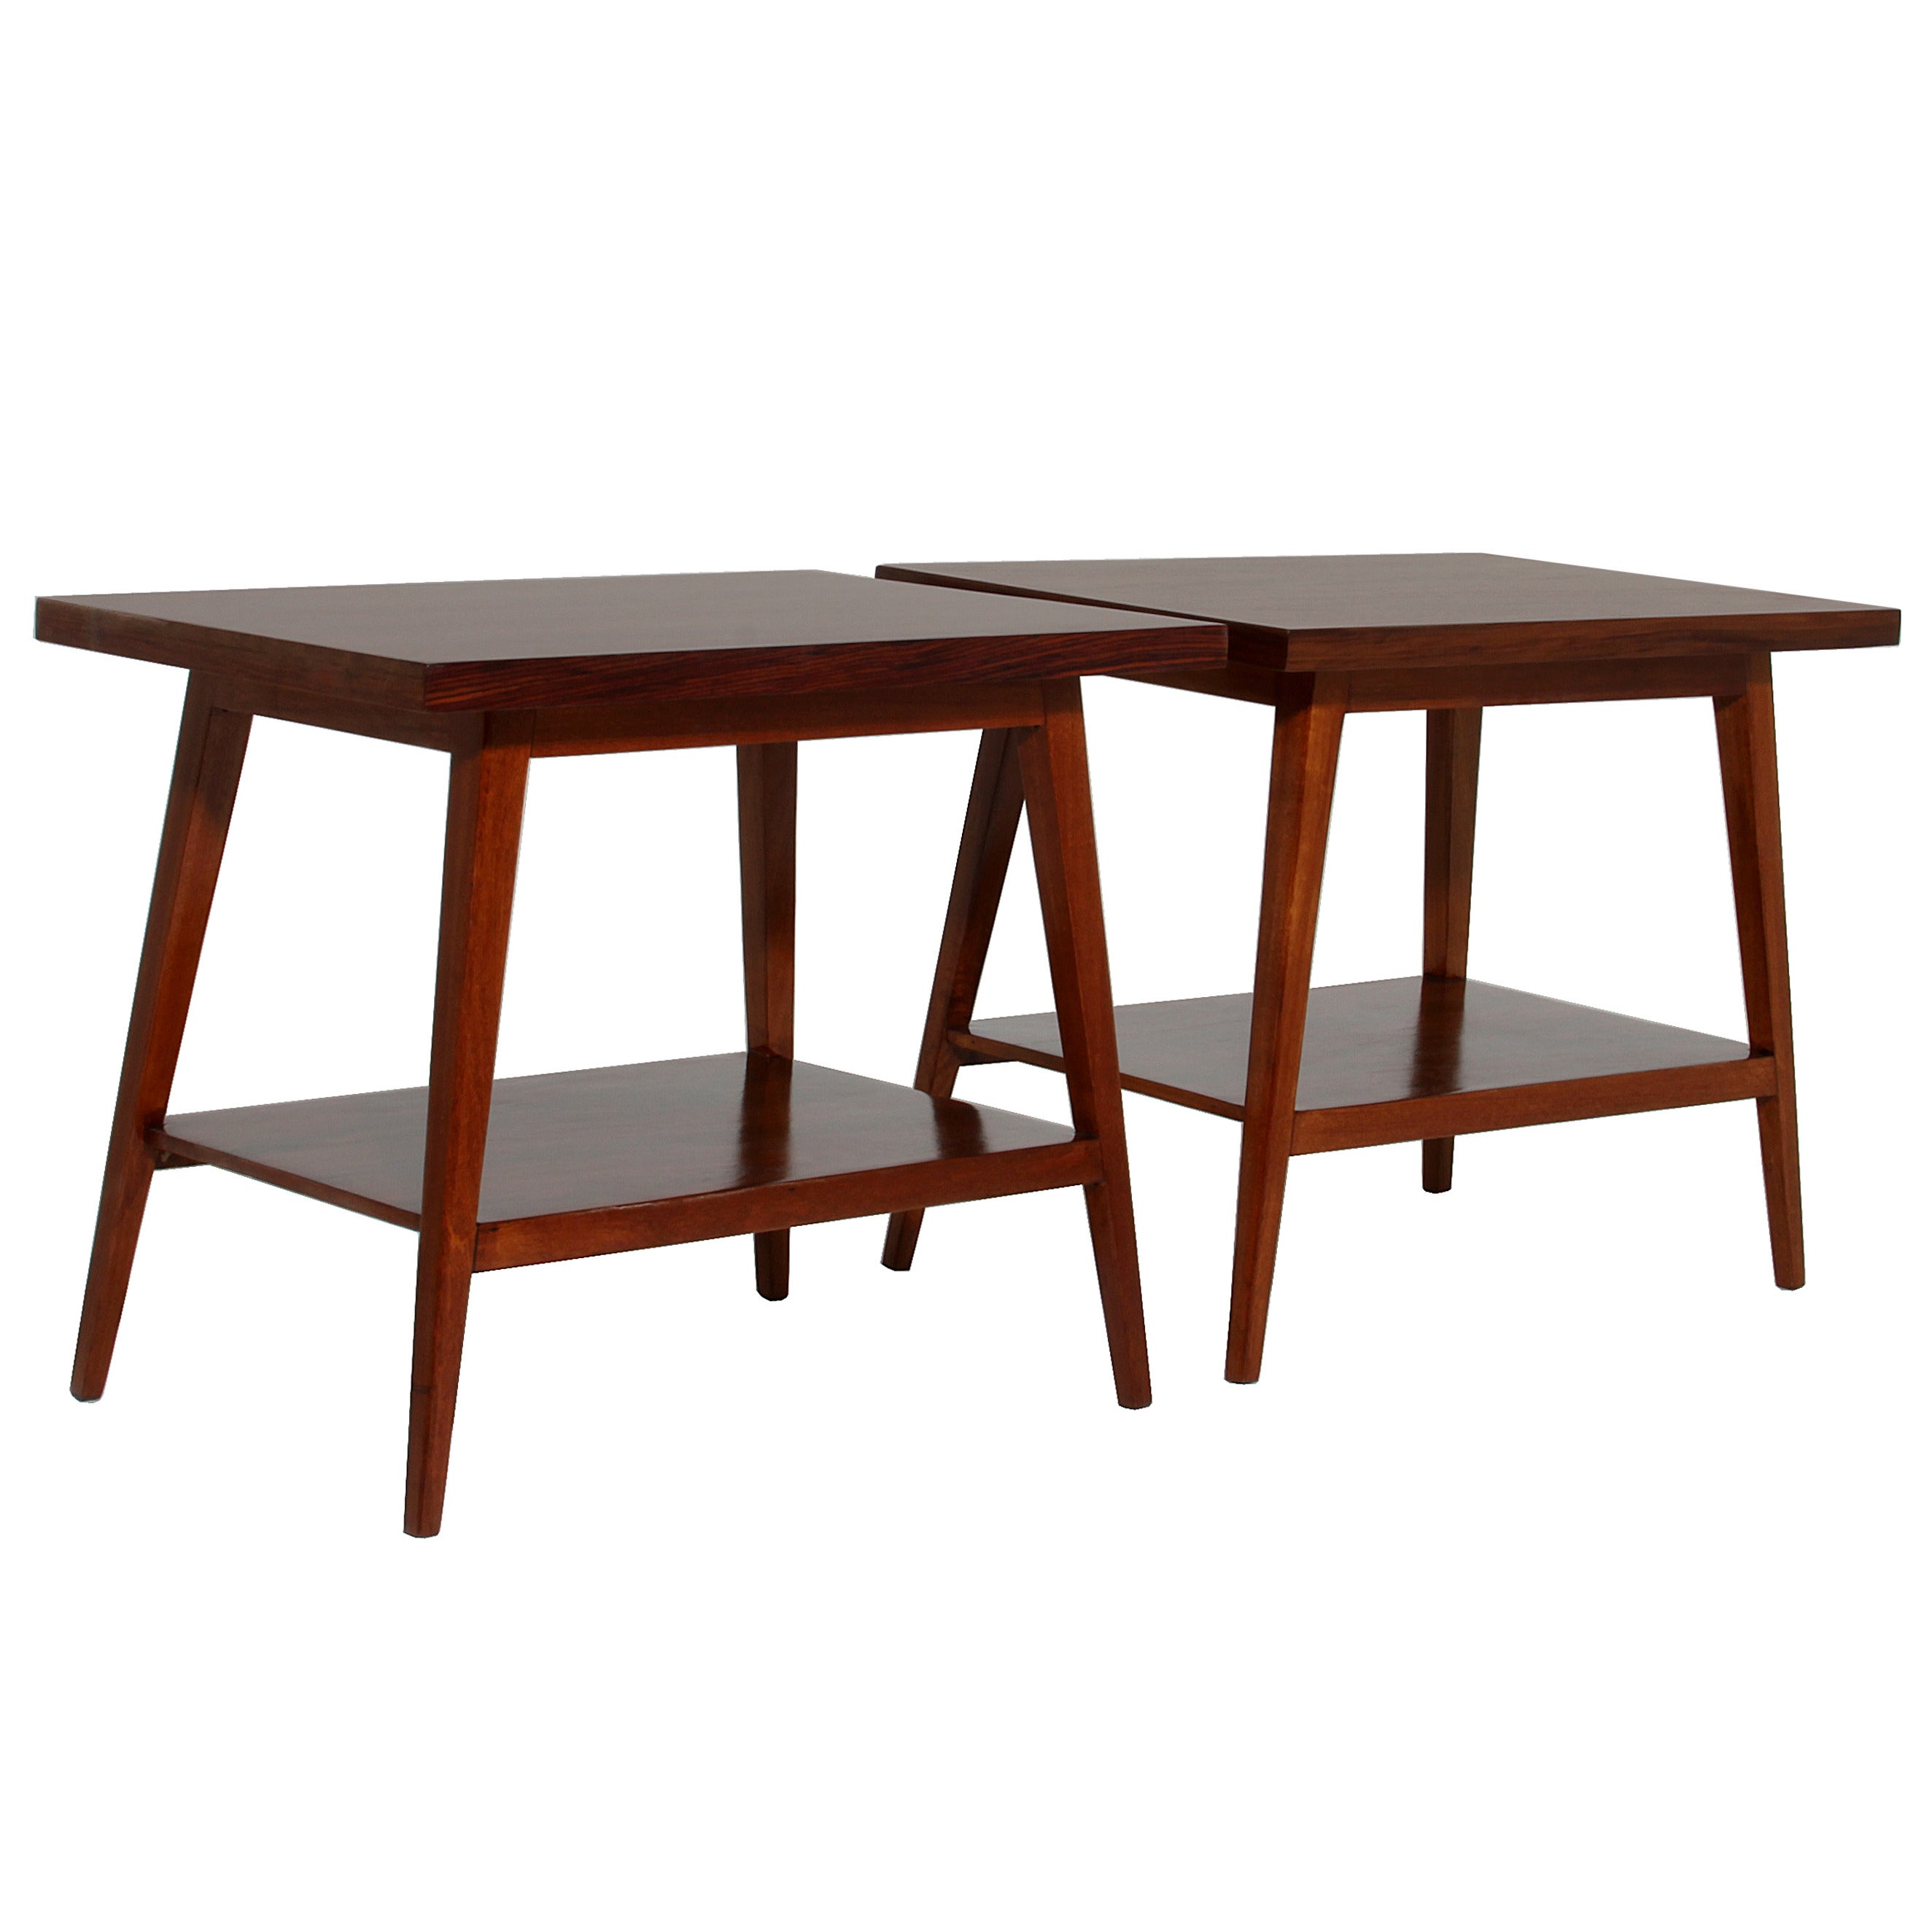 Pair of Rosewood Side Tables from Brazil For Sale